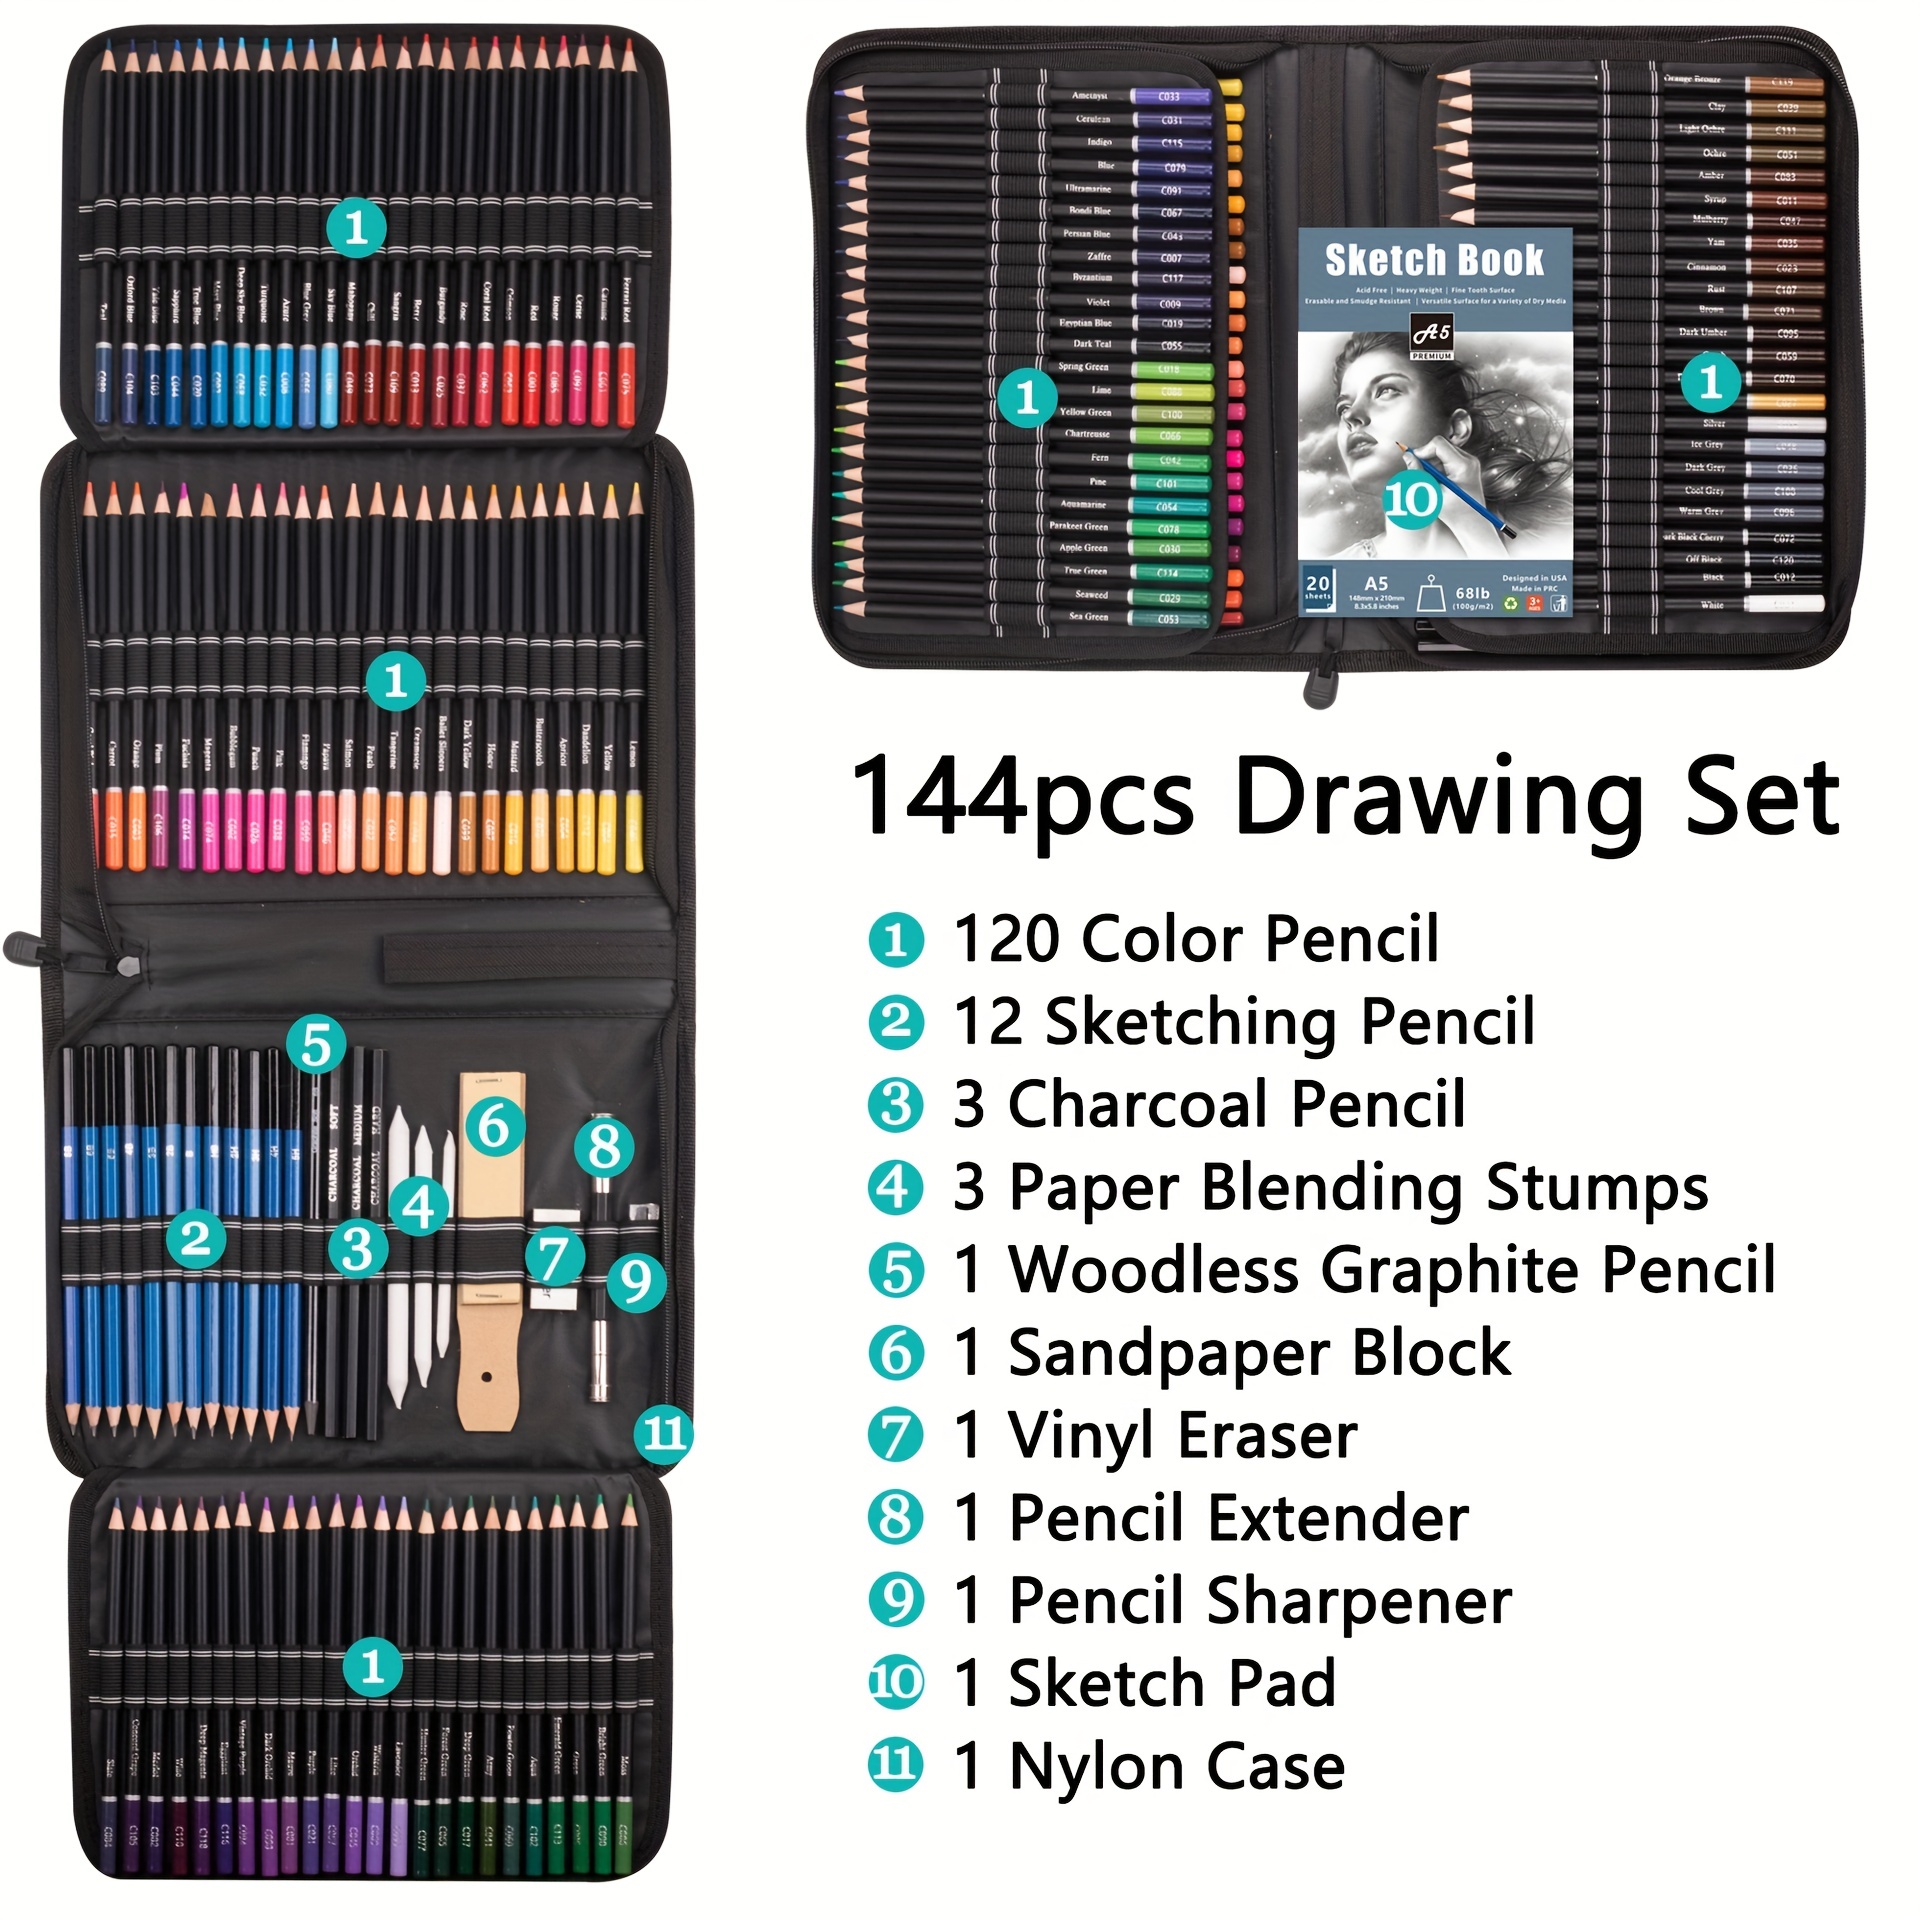 Drawing Kit Shuttle Art 103 Pack Drawing Pencils Set Sketching and Drawing  Art Set with Colored Pencils Sketch and Graphite Pencils in Portable Case  Drawing Supplies for Kids Adults and Artists